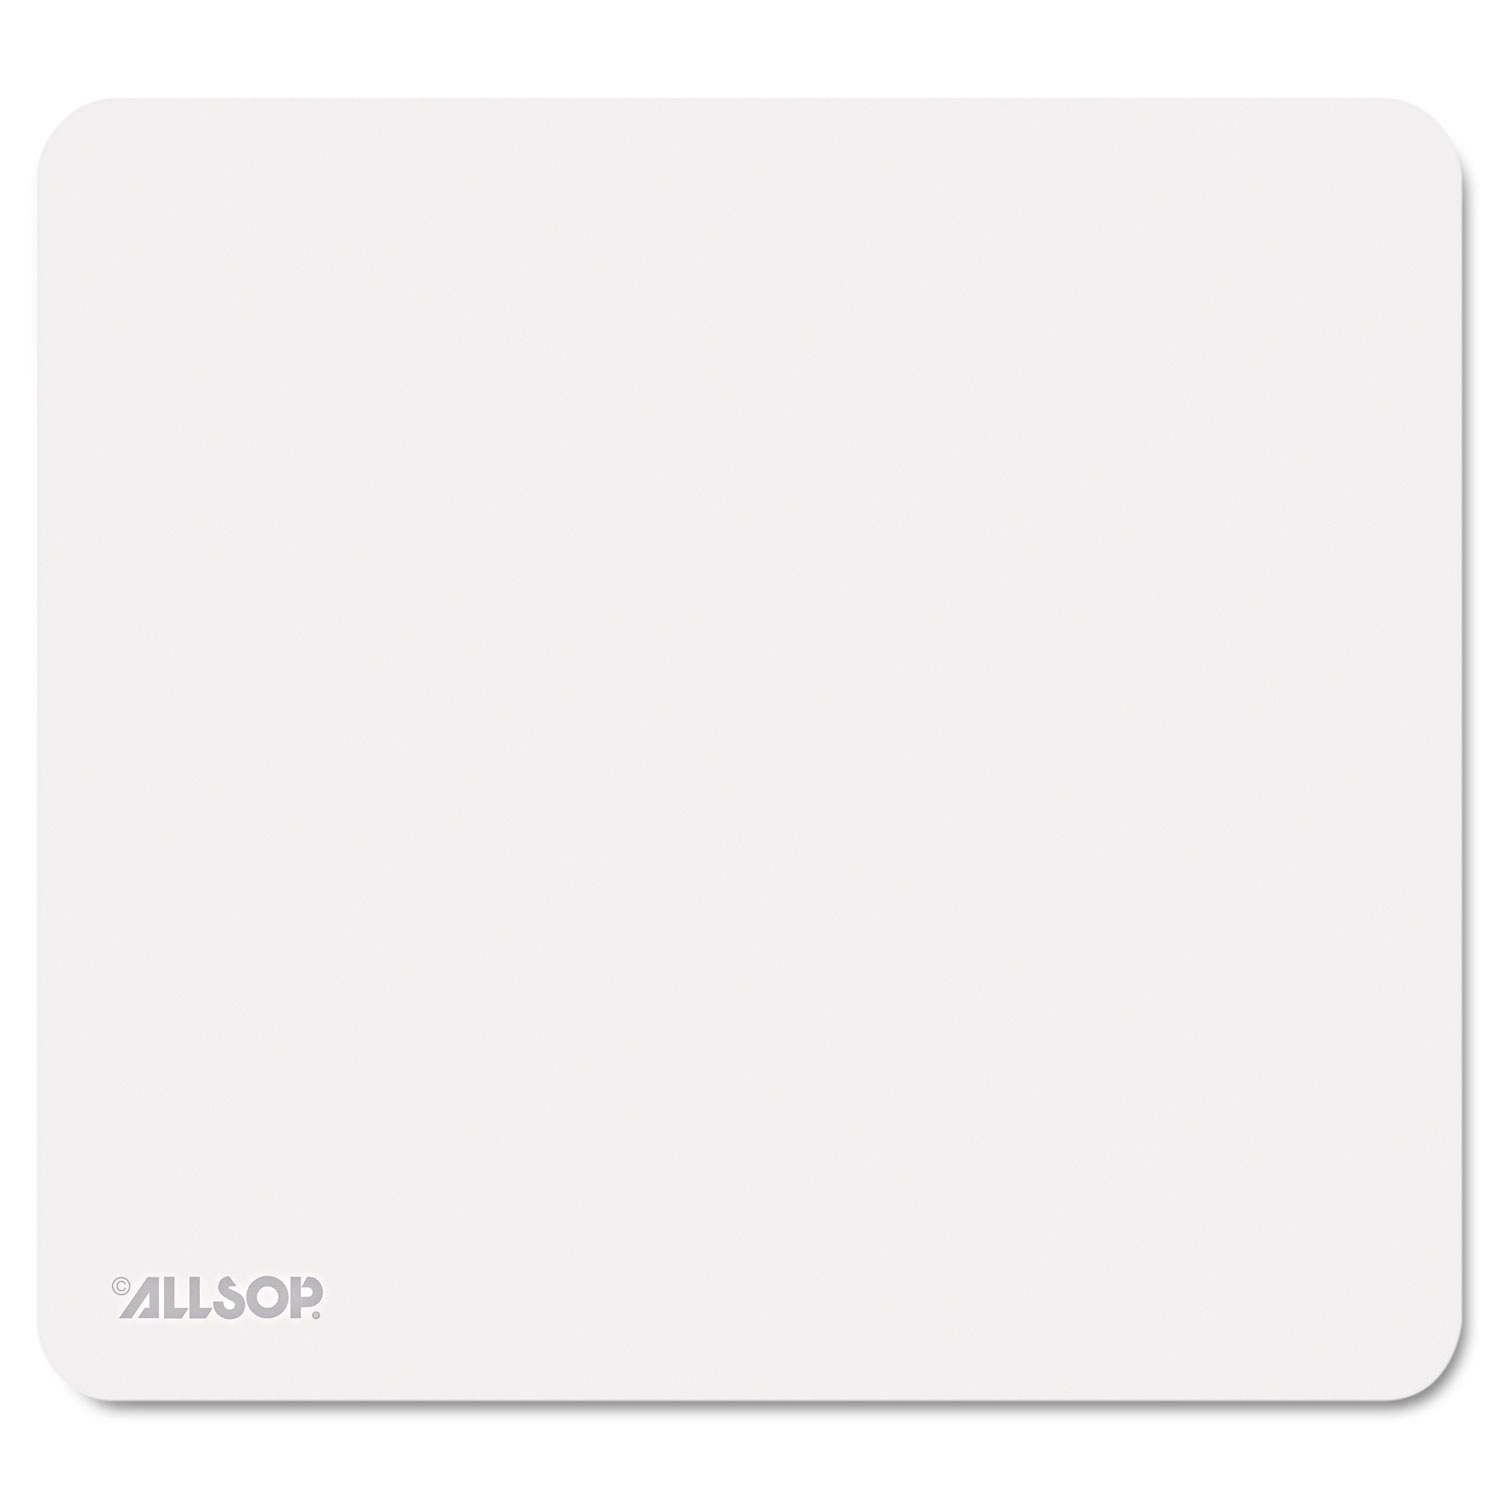 Accutrack Slimline Mouse Pad, Silver, 8 3/4" x 8"